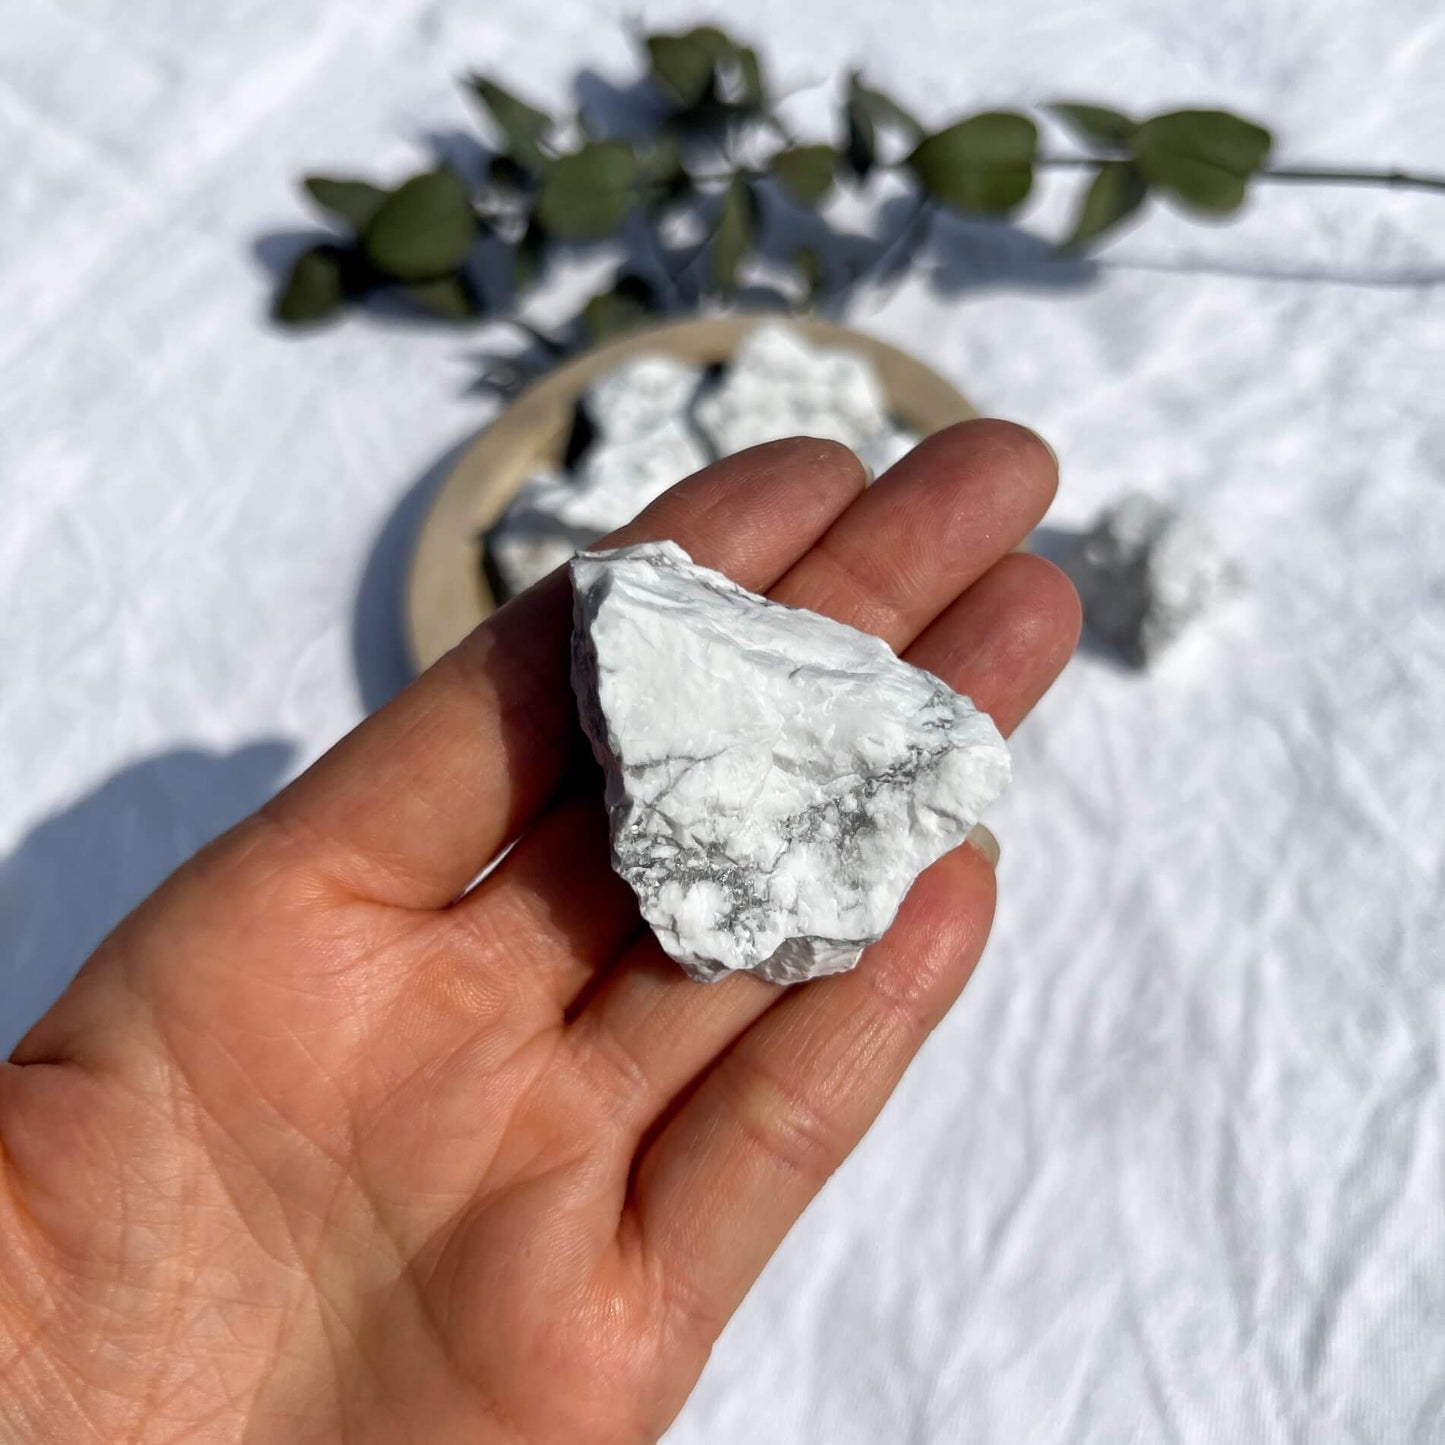 A white and grey marbled howlite crystal chunk is laid on an outstretched hand